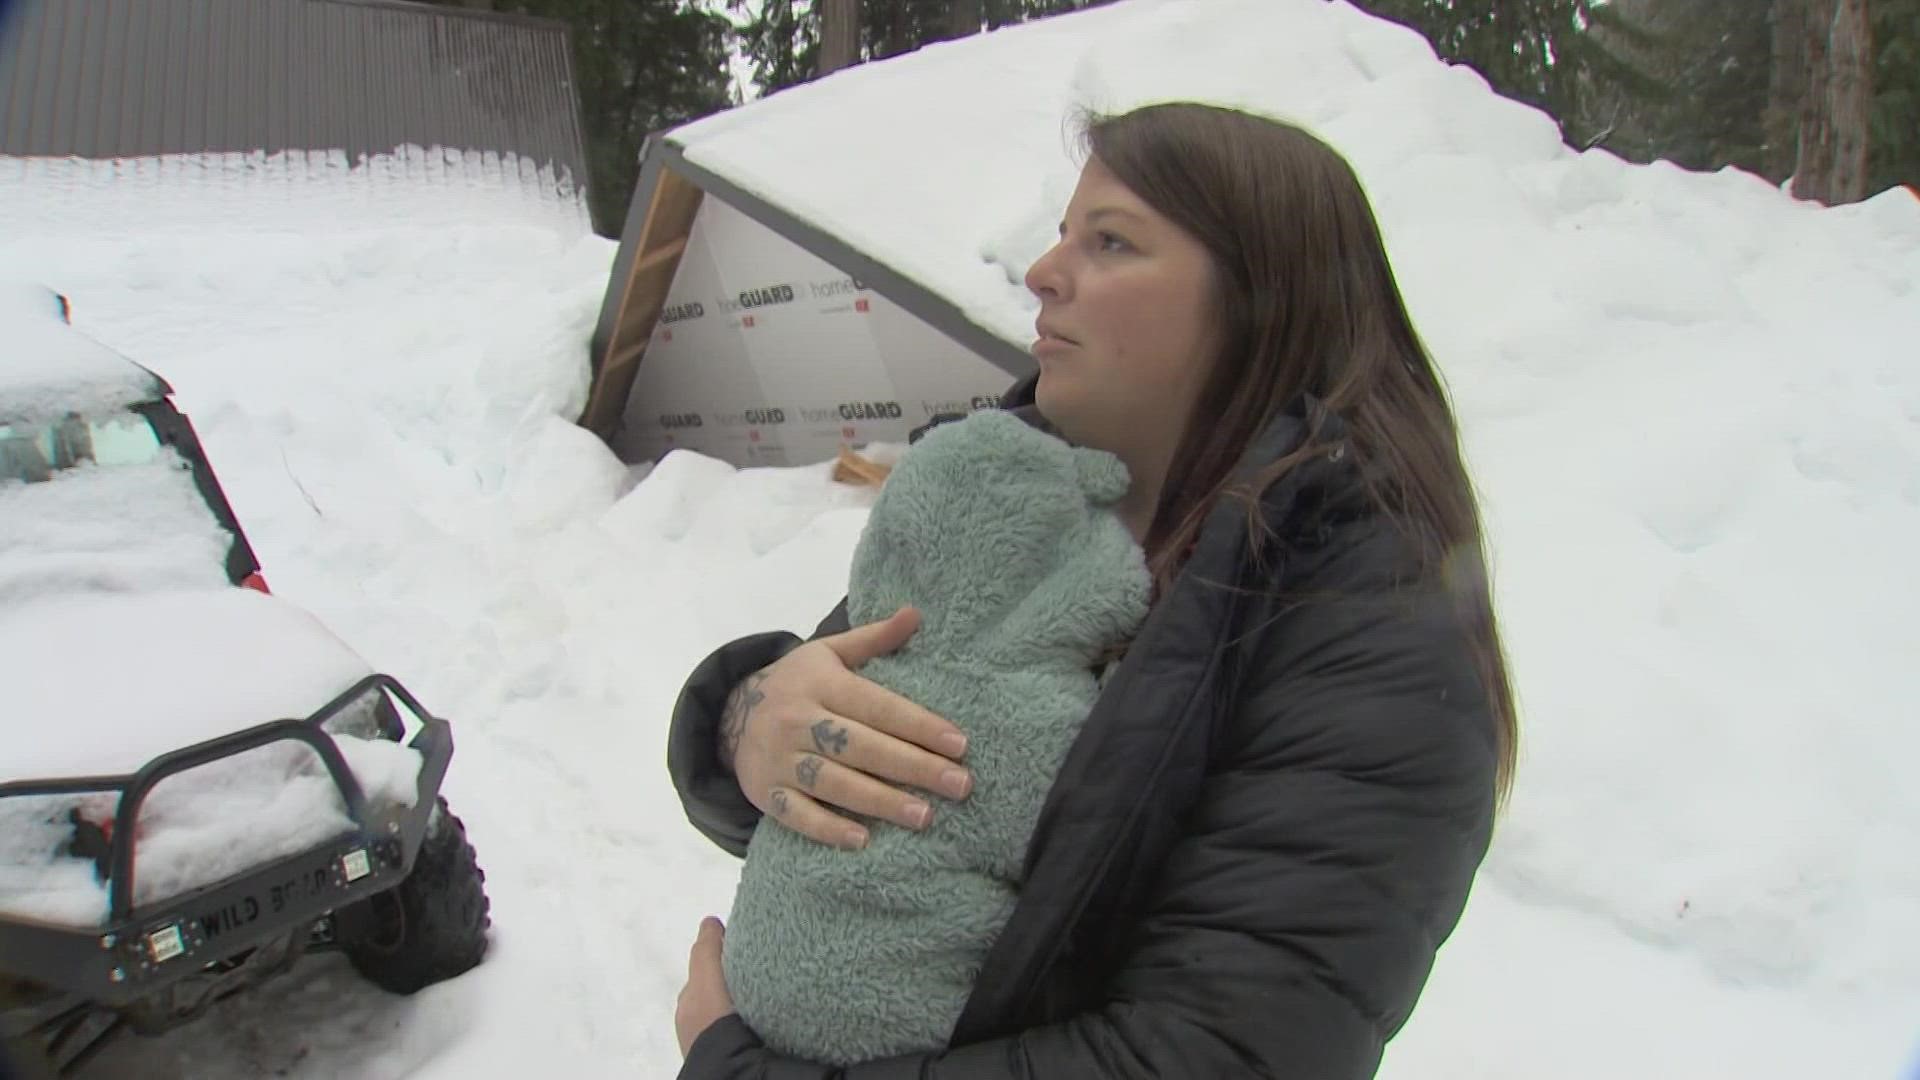 Emily Elkins thought she was safe at home Jan. 8, the day after a weather system brought 4 feet of snow.